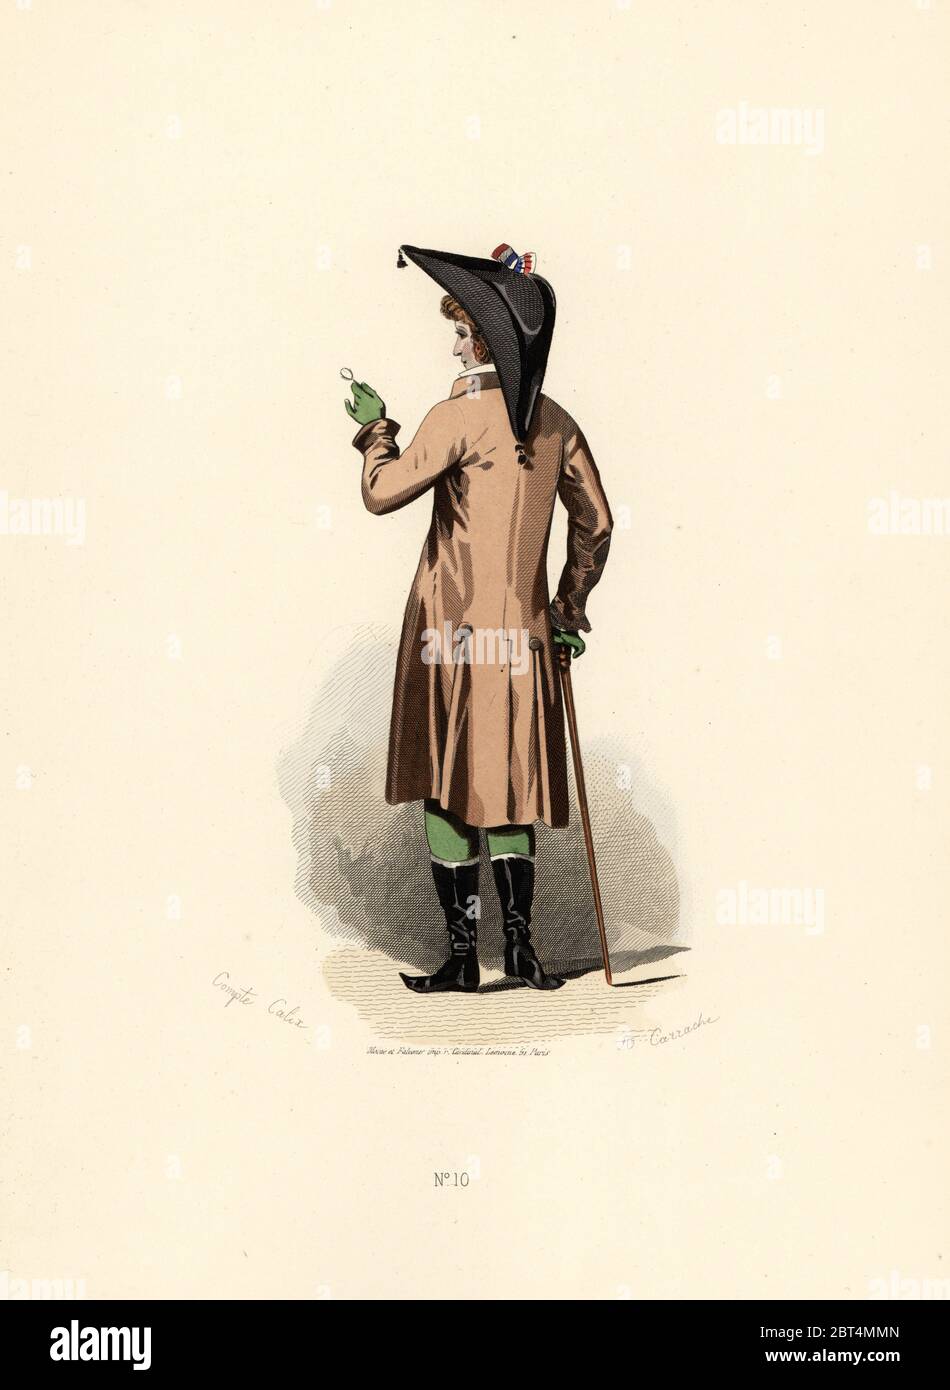 Man in hazelnut colour coat, green culottes and gloves, black boots and hat with tricolor cockade. Handcoloured lithograph by A. Carrache after an illustration by Francois-Claudius Compte-Calix from Les Modes Parisienne sous le Directoire Aux Bureaux des Modes Parisiennes, Paris, 1871. Stock Photo